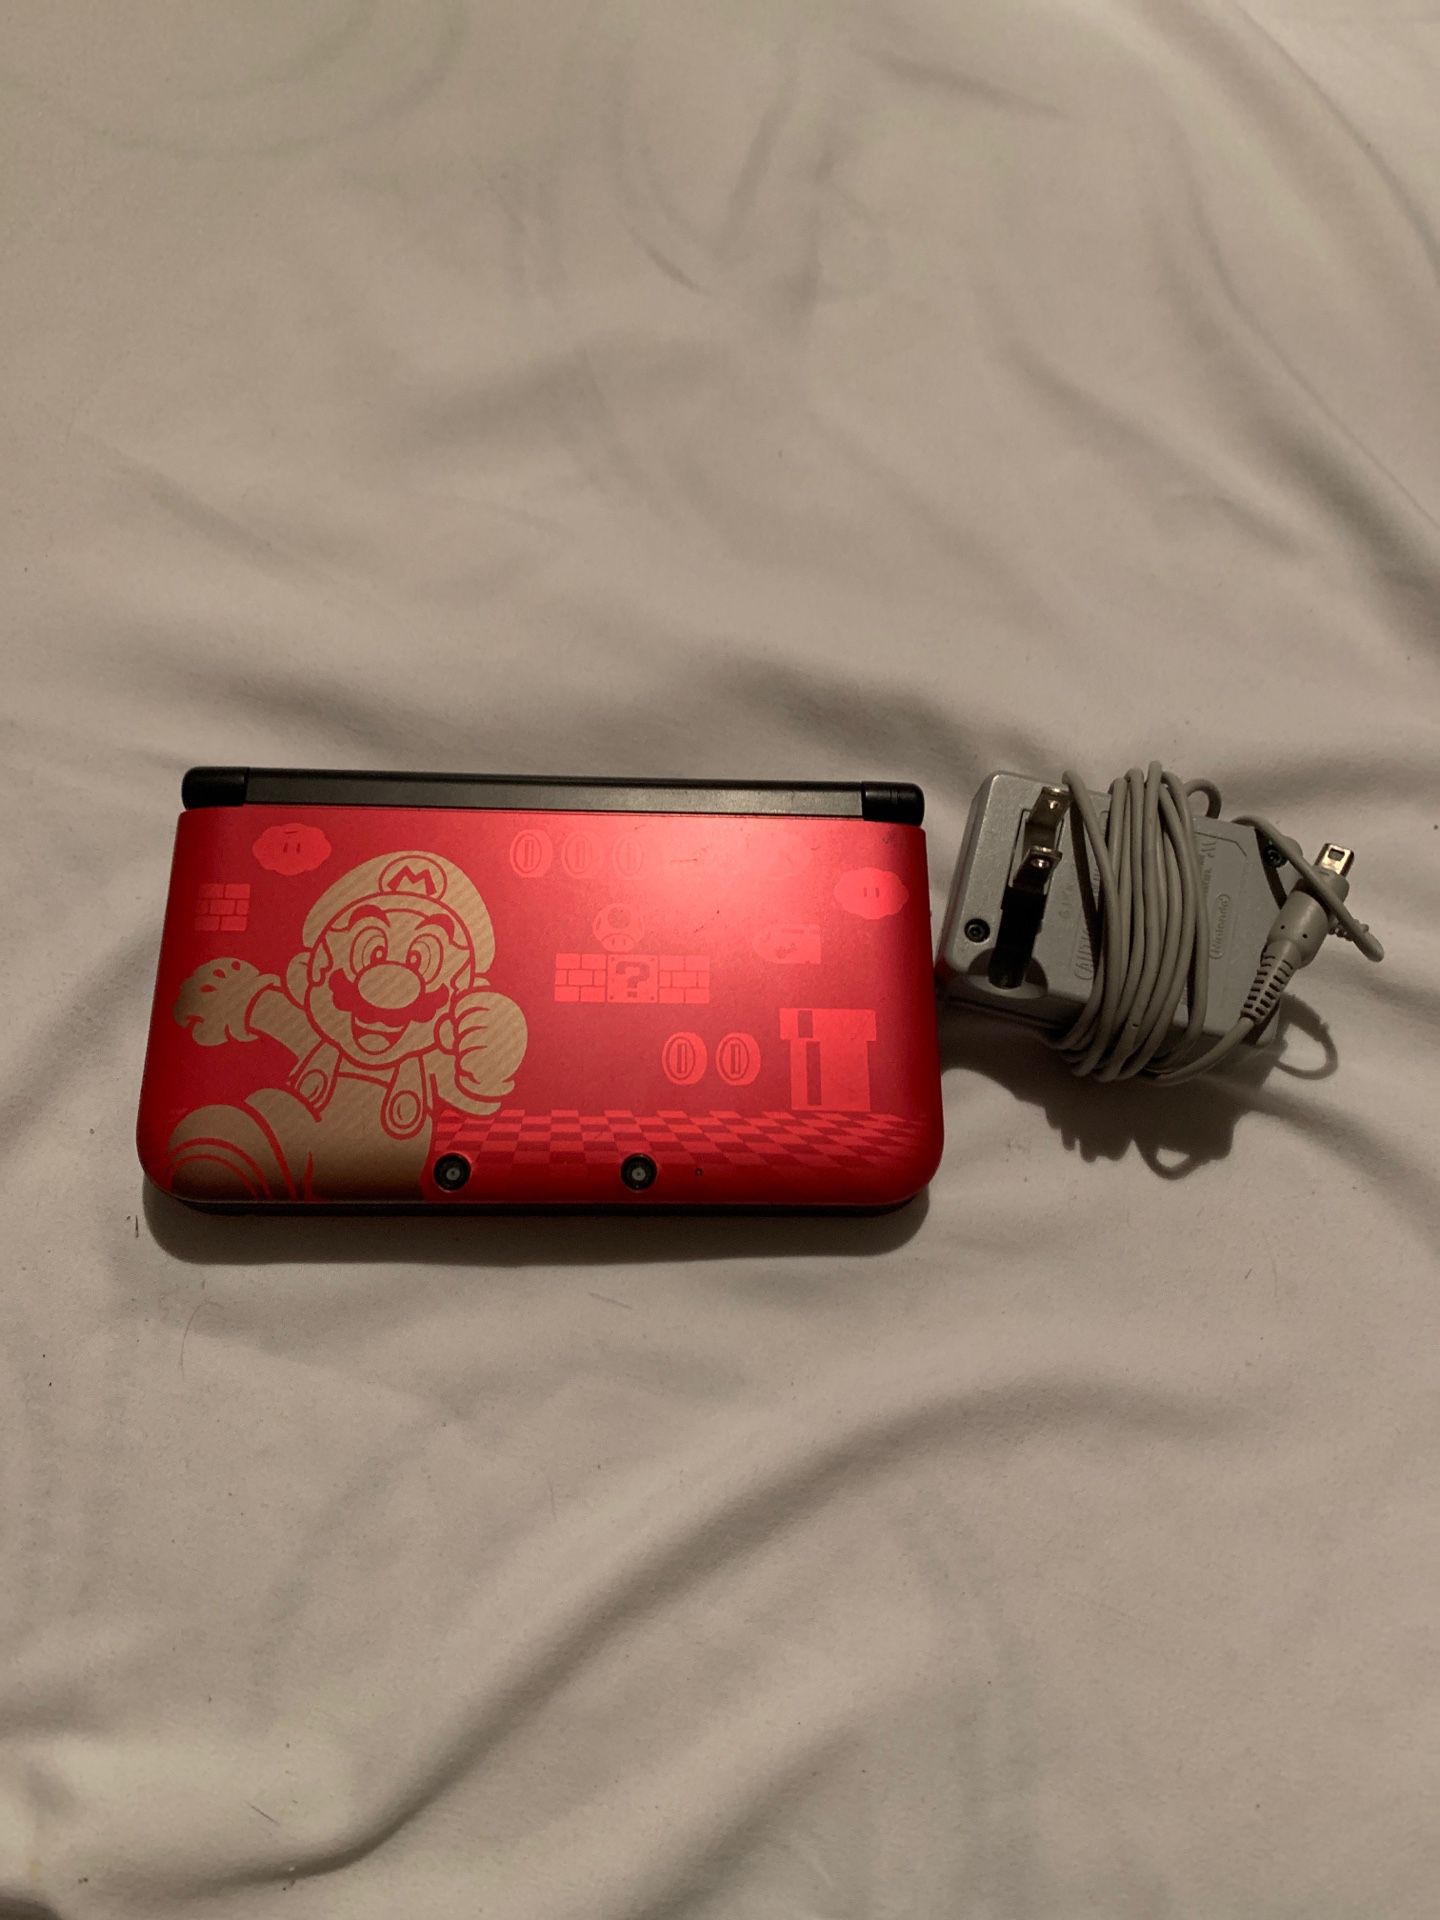 Nintendo 3DS XL Mario Luigi with pen and charger asked $100